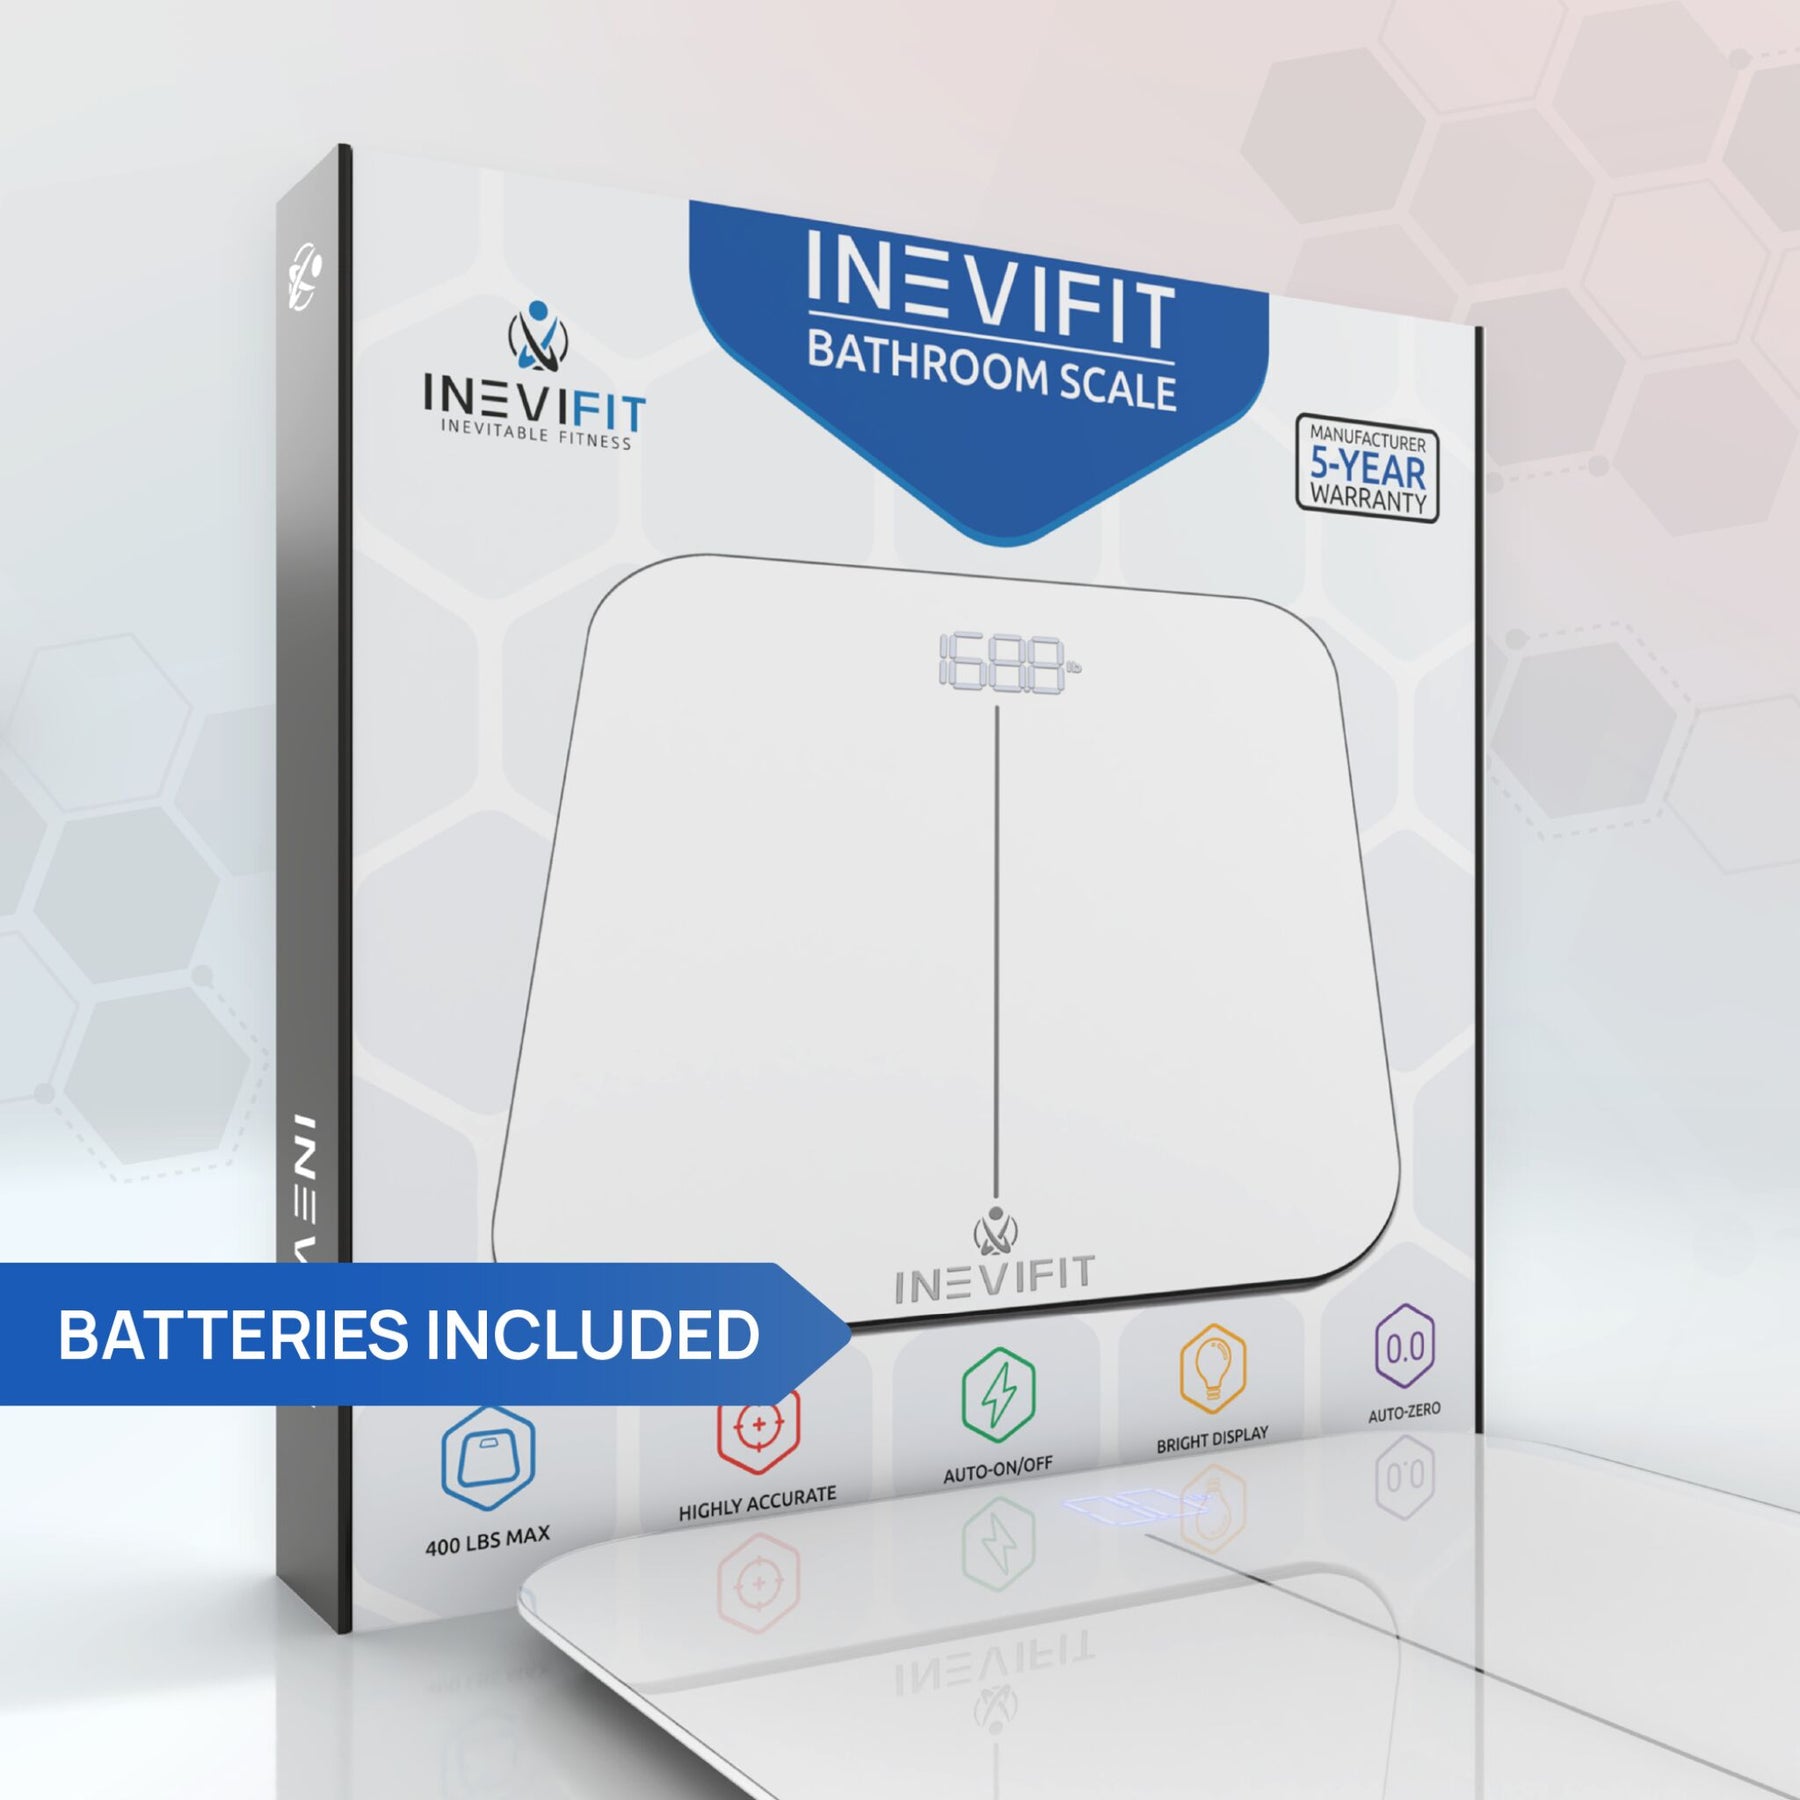 INEVIFIT Bathroom Scale & Digital Kitchen Scale Fitness Bundle, Complete  Body Composition and Nutrition Tracking Solution with Batteries Included